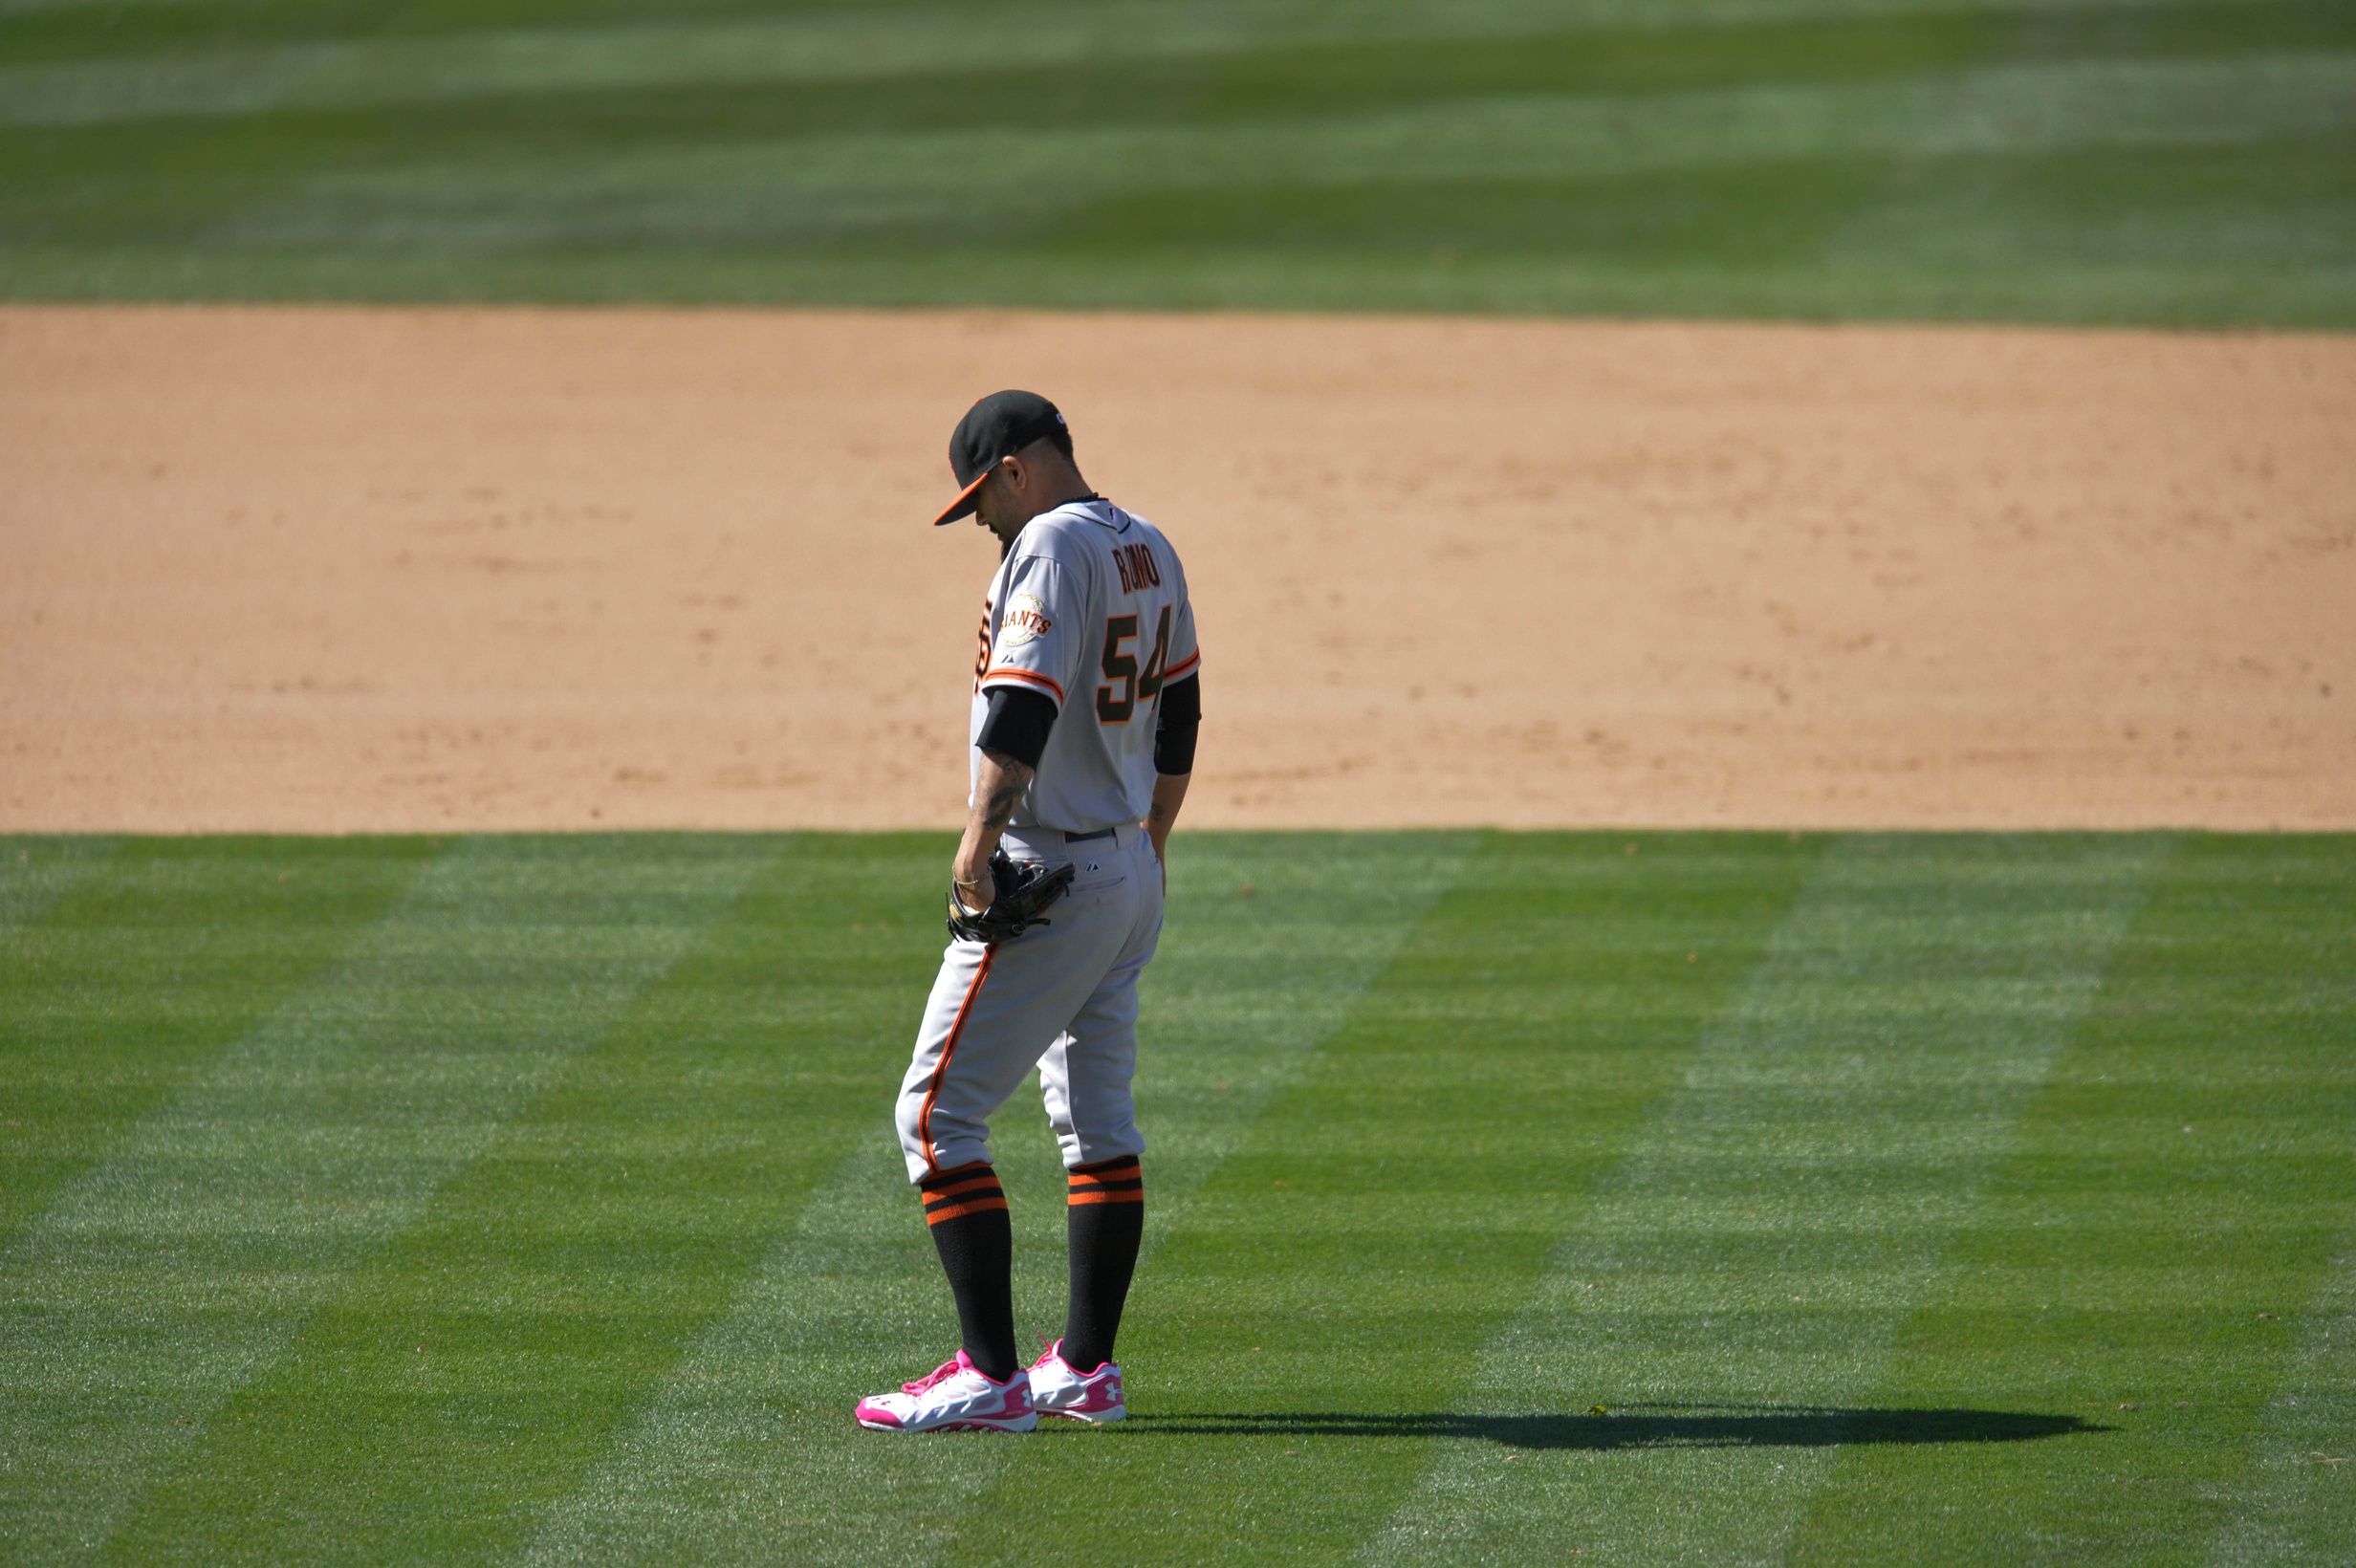 One-Time Dodger Suits Up For the Final Time With Rival Giants and it Gets Emotional